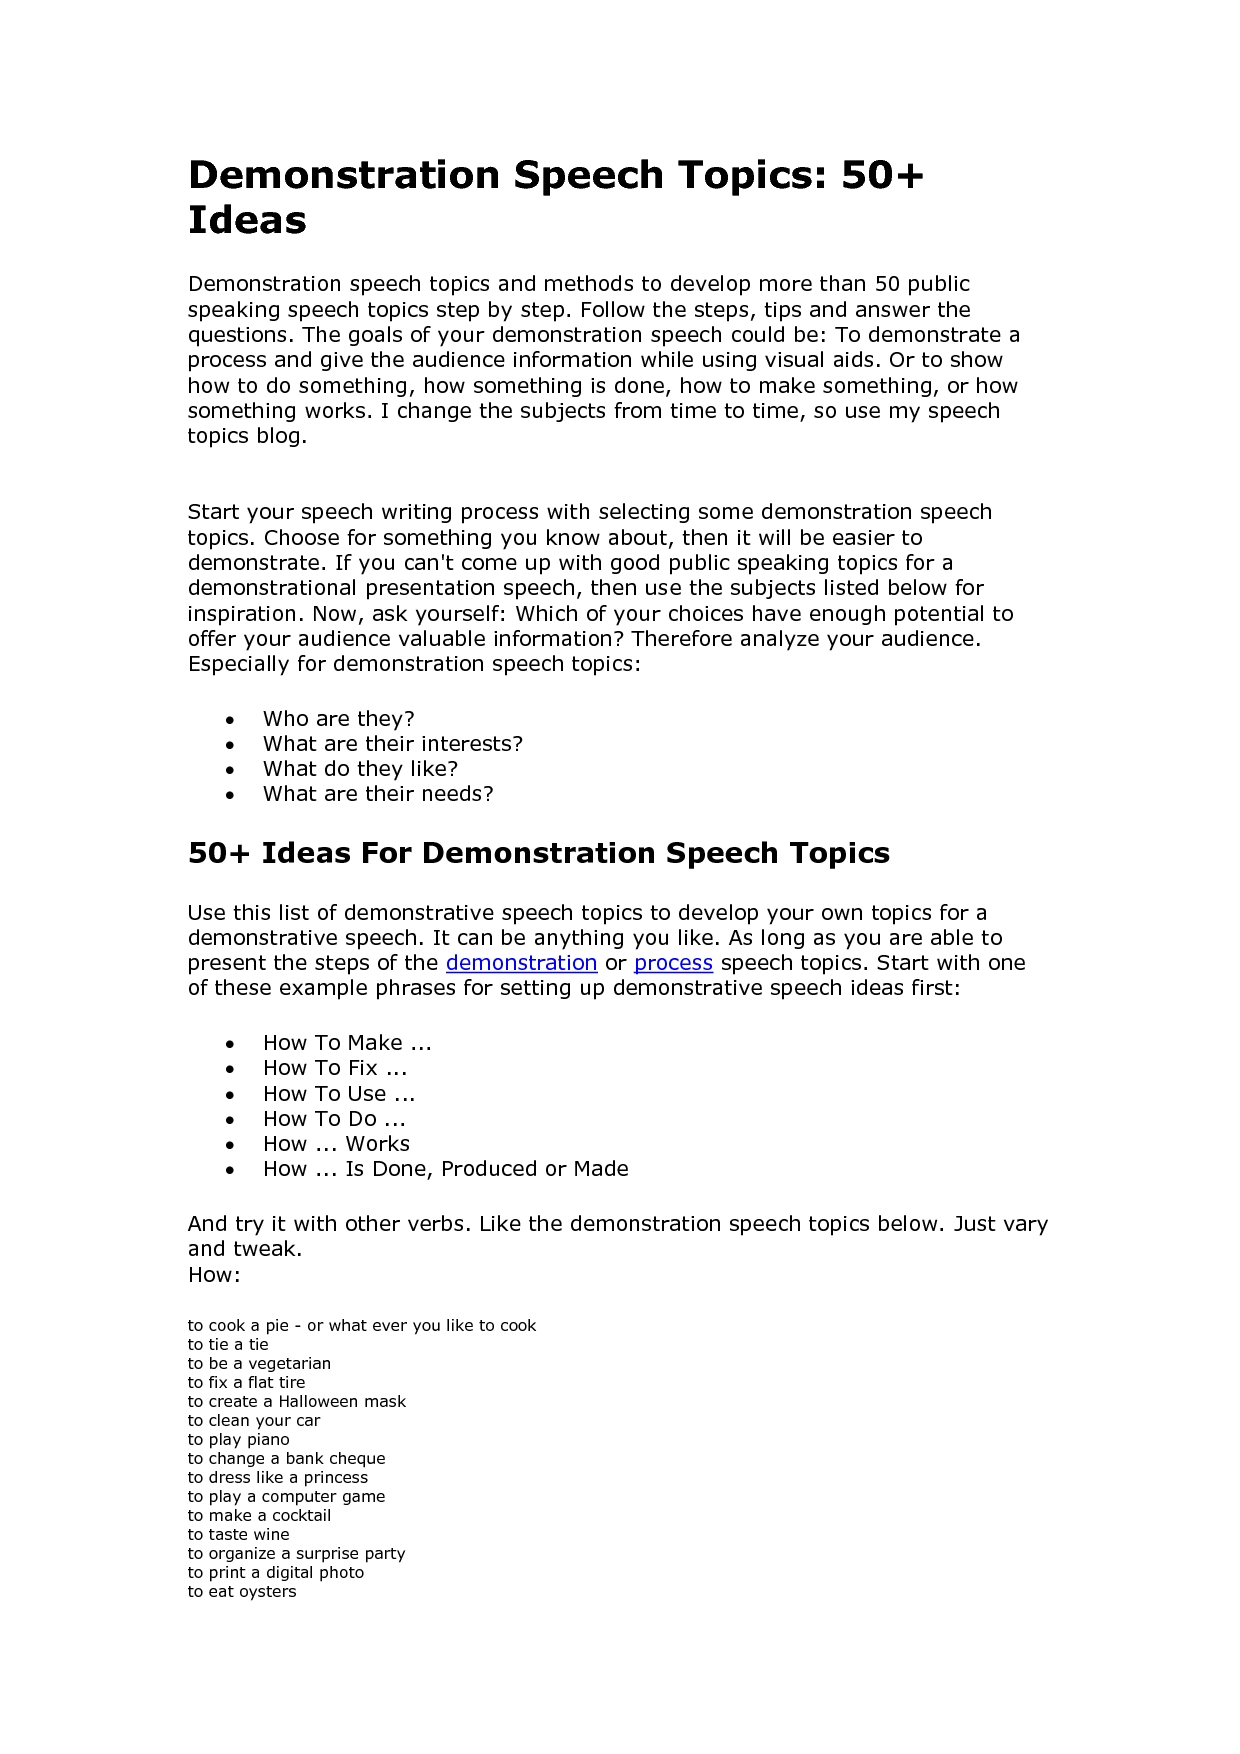 good demonstration speech ideas for college students